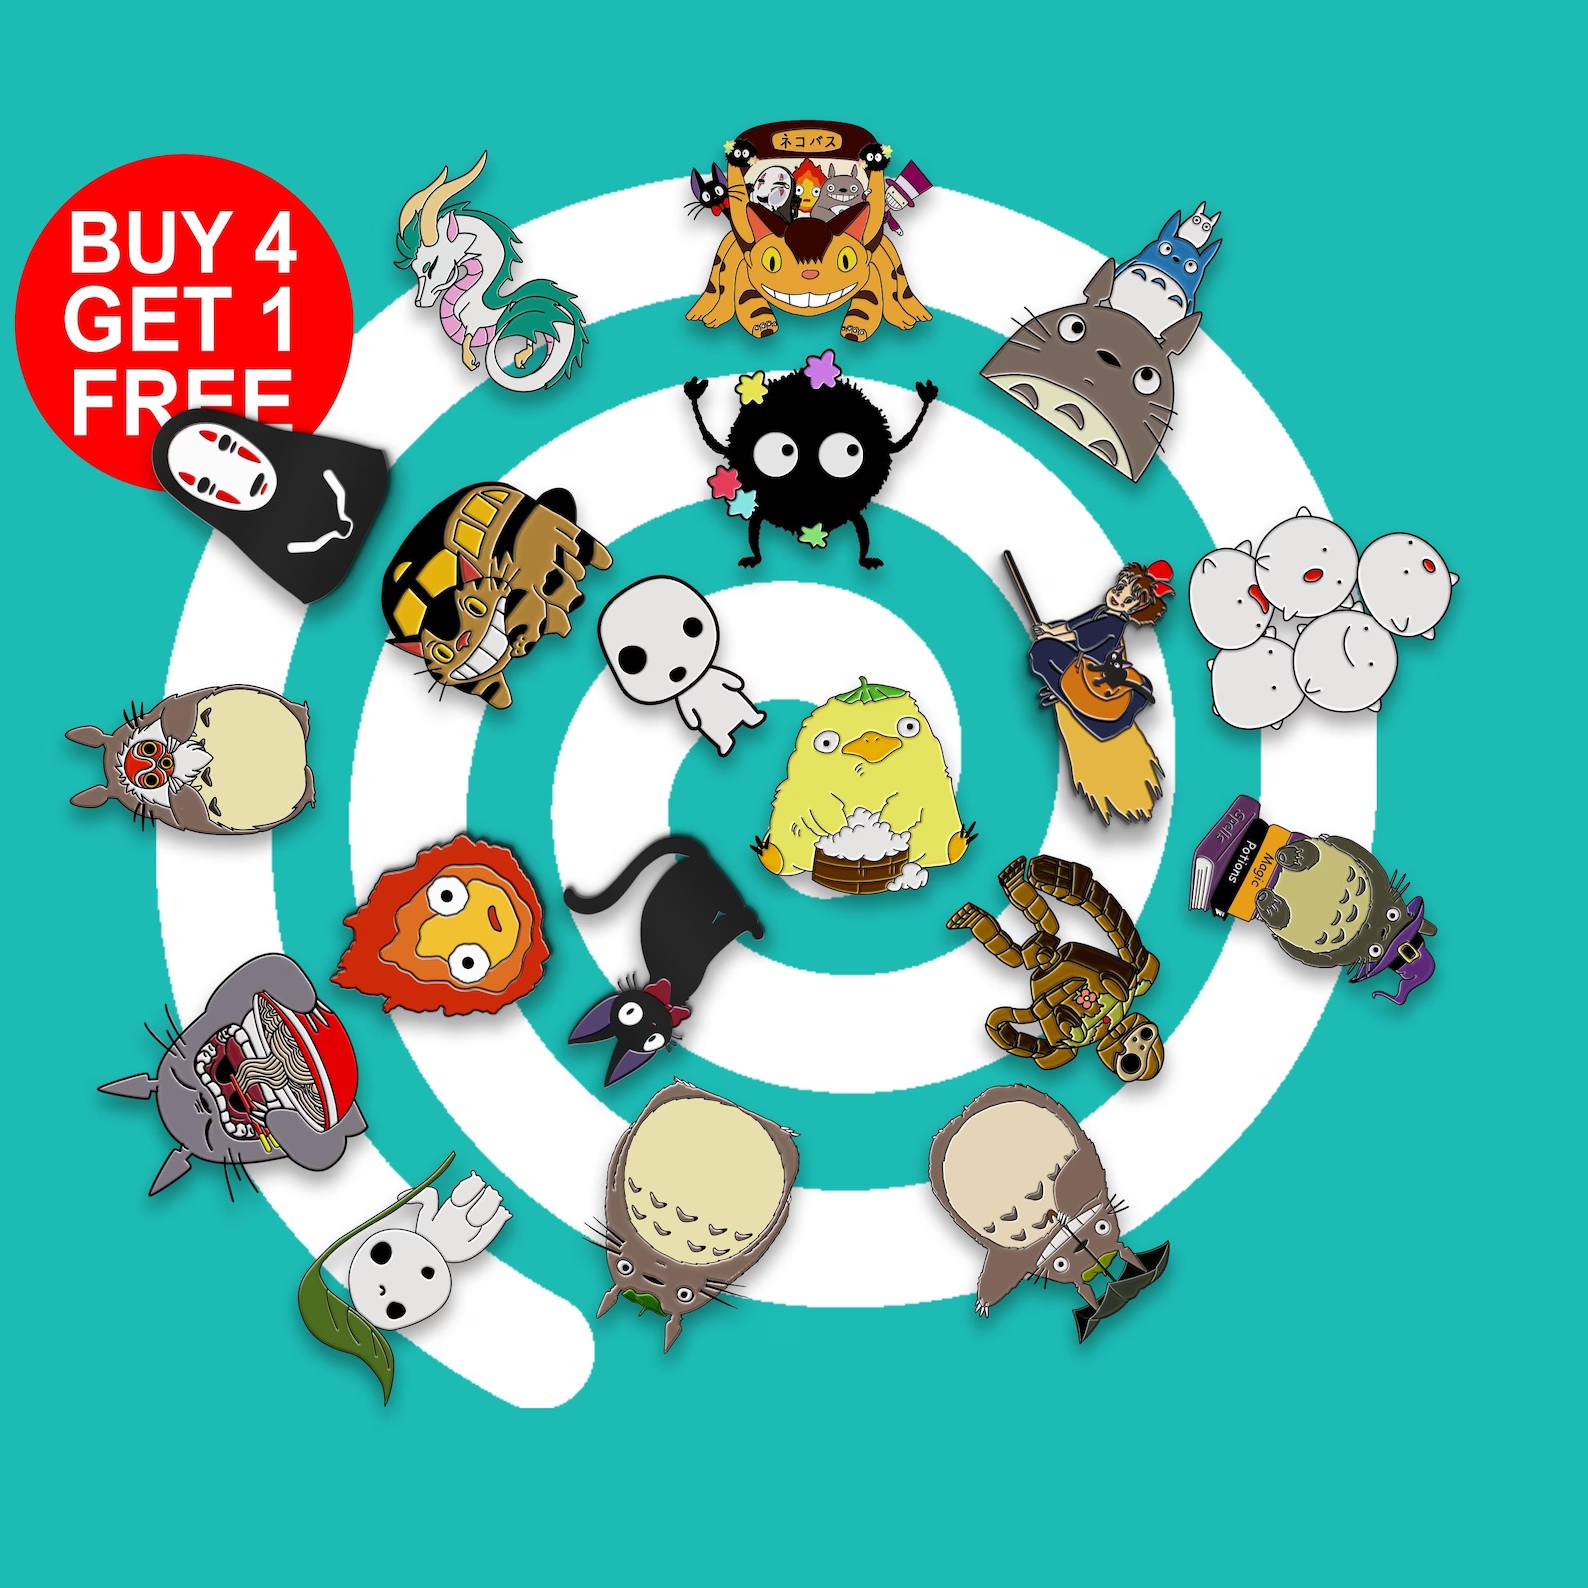 A spiral of enamel pins, each featuring a different Ghibli character